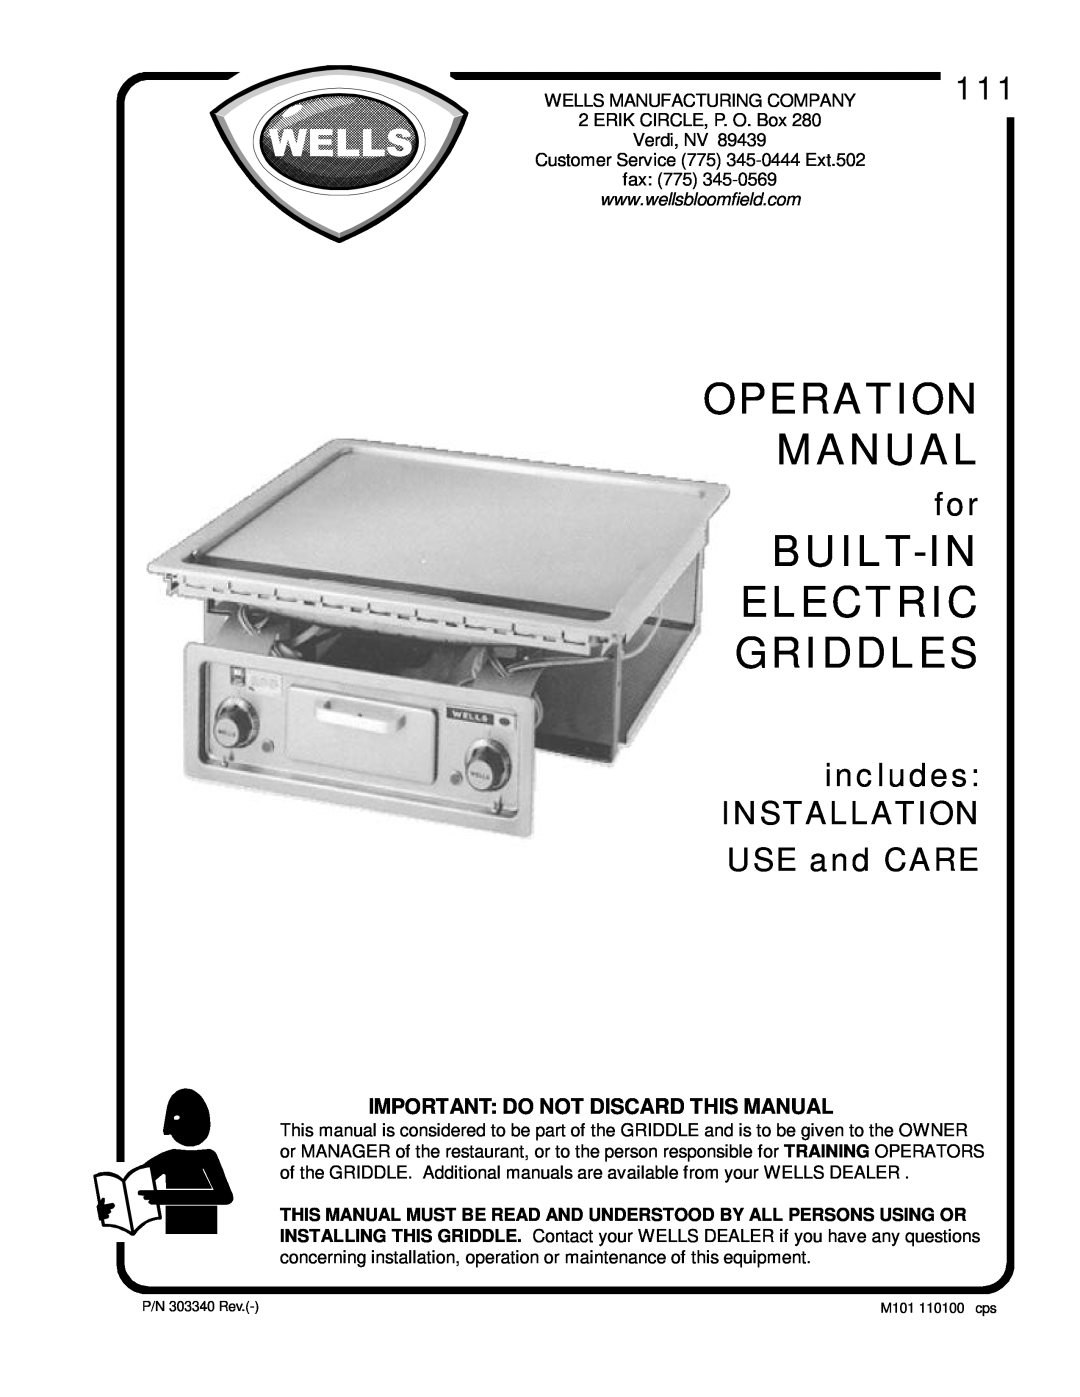 Wells Bulit-In Electric Griddles operation manual includes INSTALLATION USE and CARE, Important Do Not Discard This Manual 